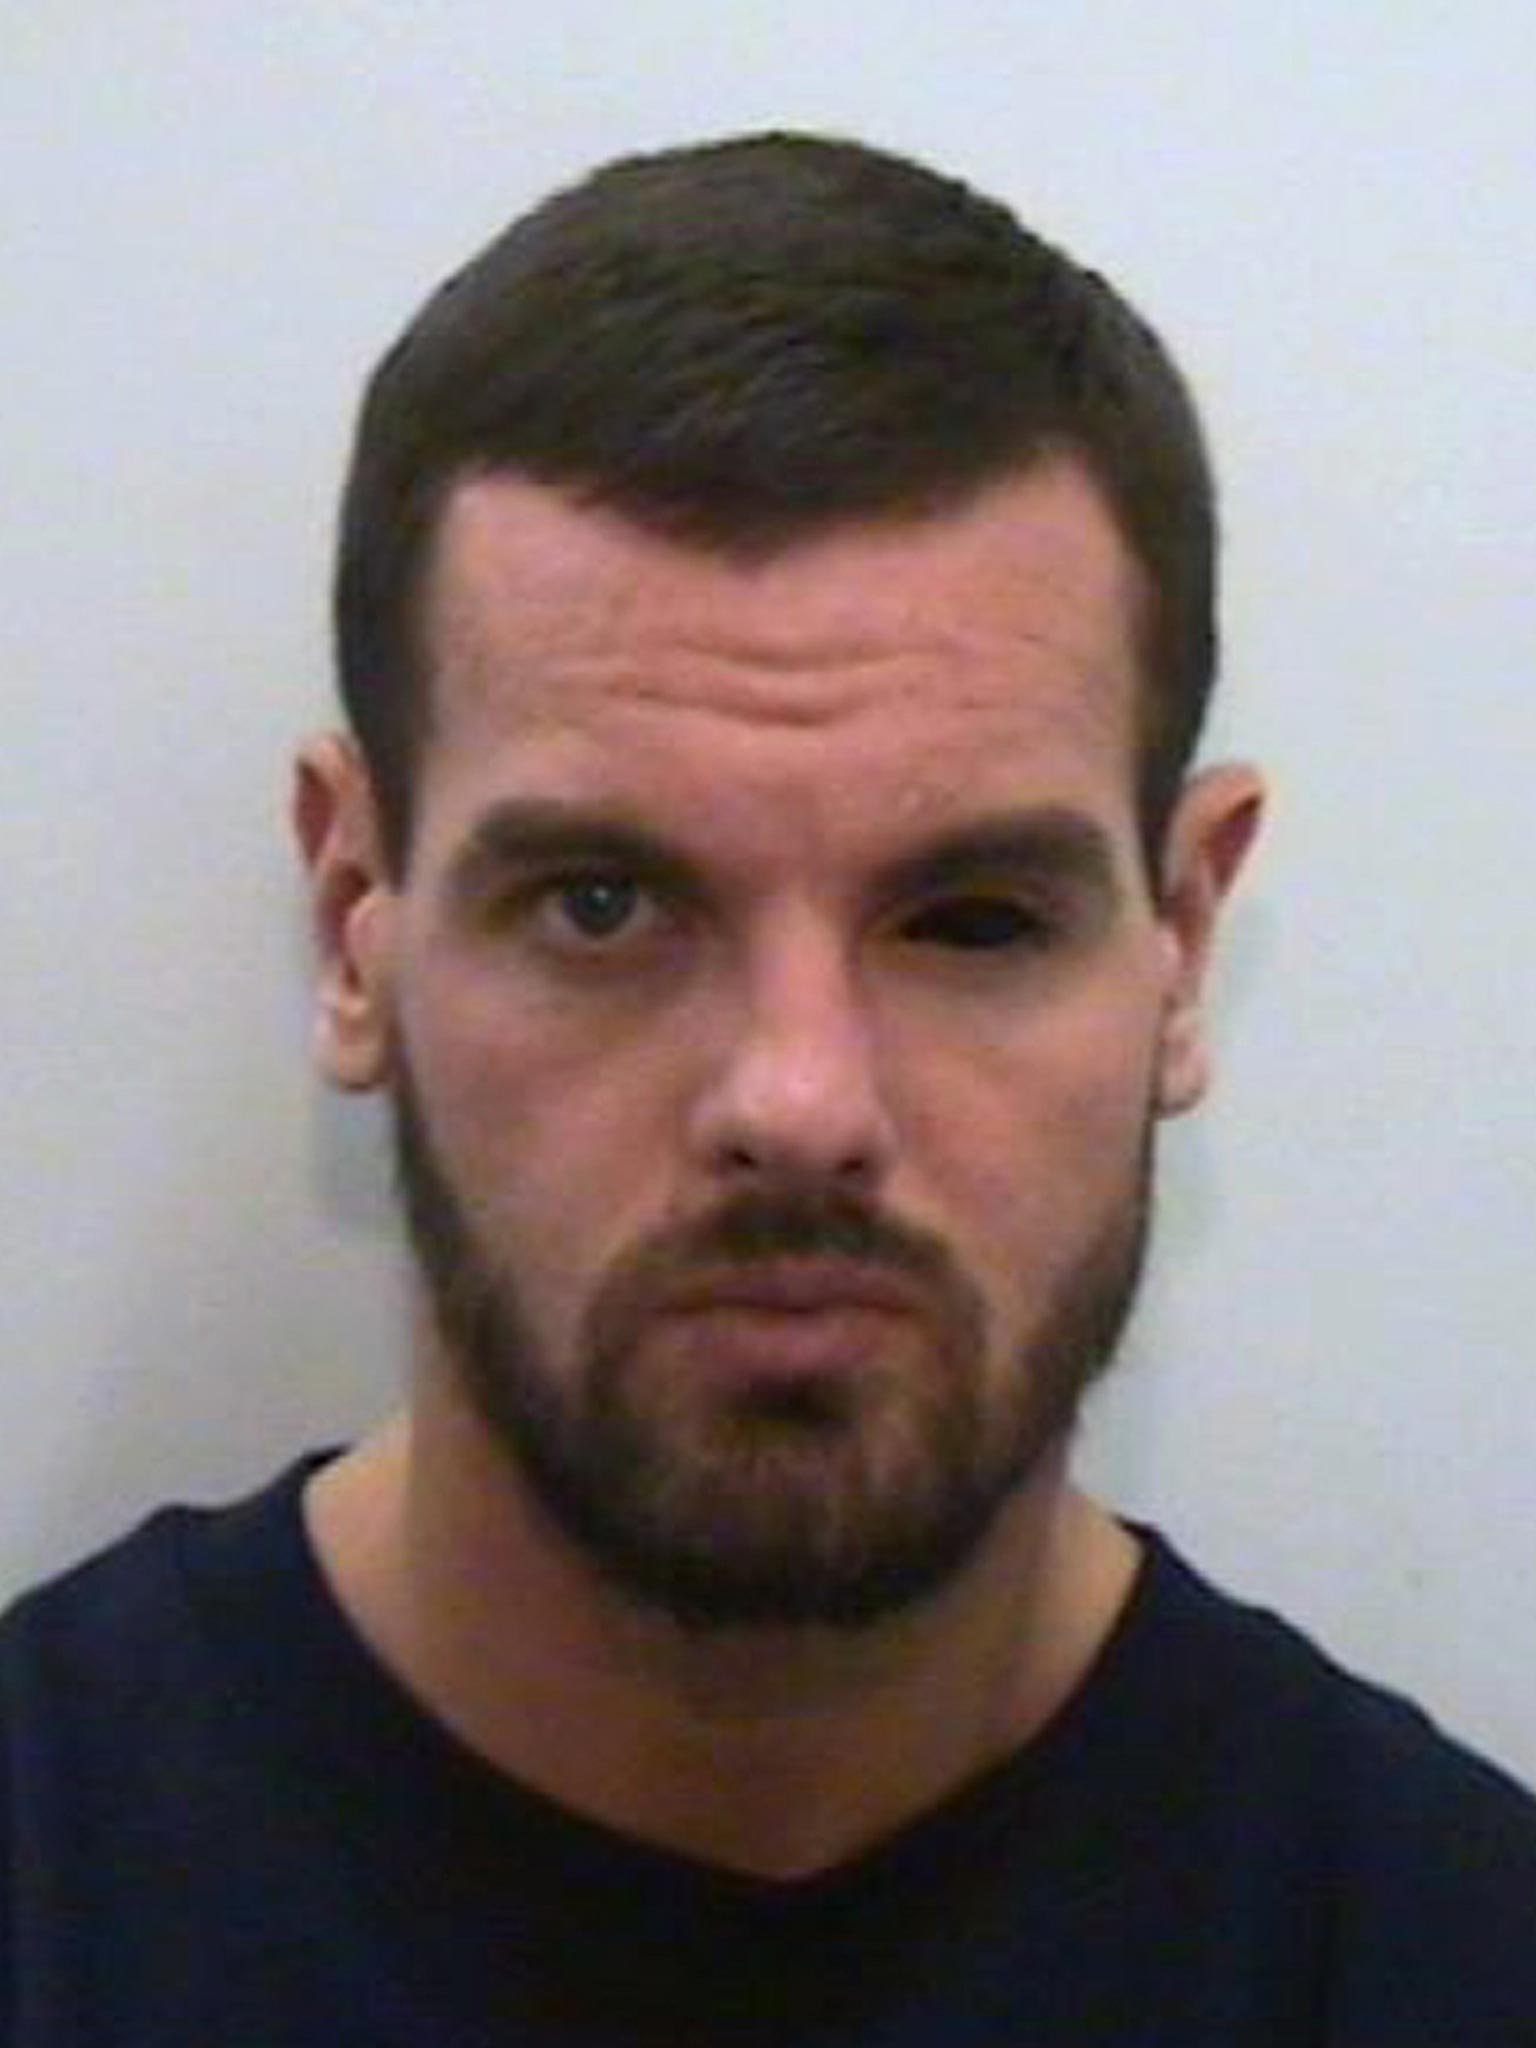 Dale Cregan will spend the rest of his life behind bars